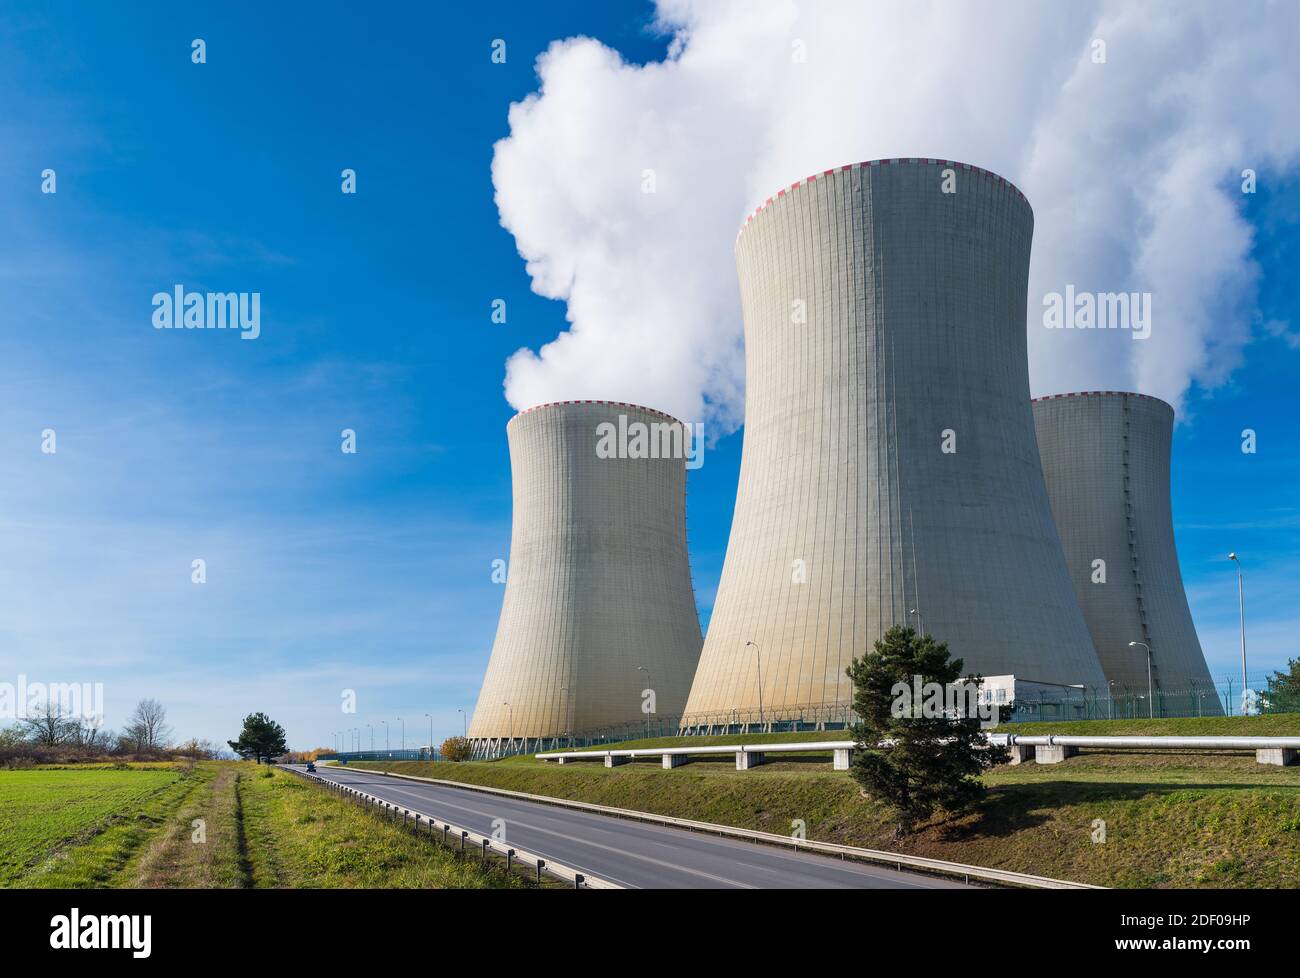 Nuclear power plant cooling towers with water vapor plumes on blue sky background. Modern generating station in landscape, road and steam piping. Eco. Stock Photo